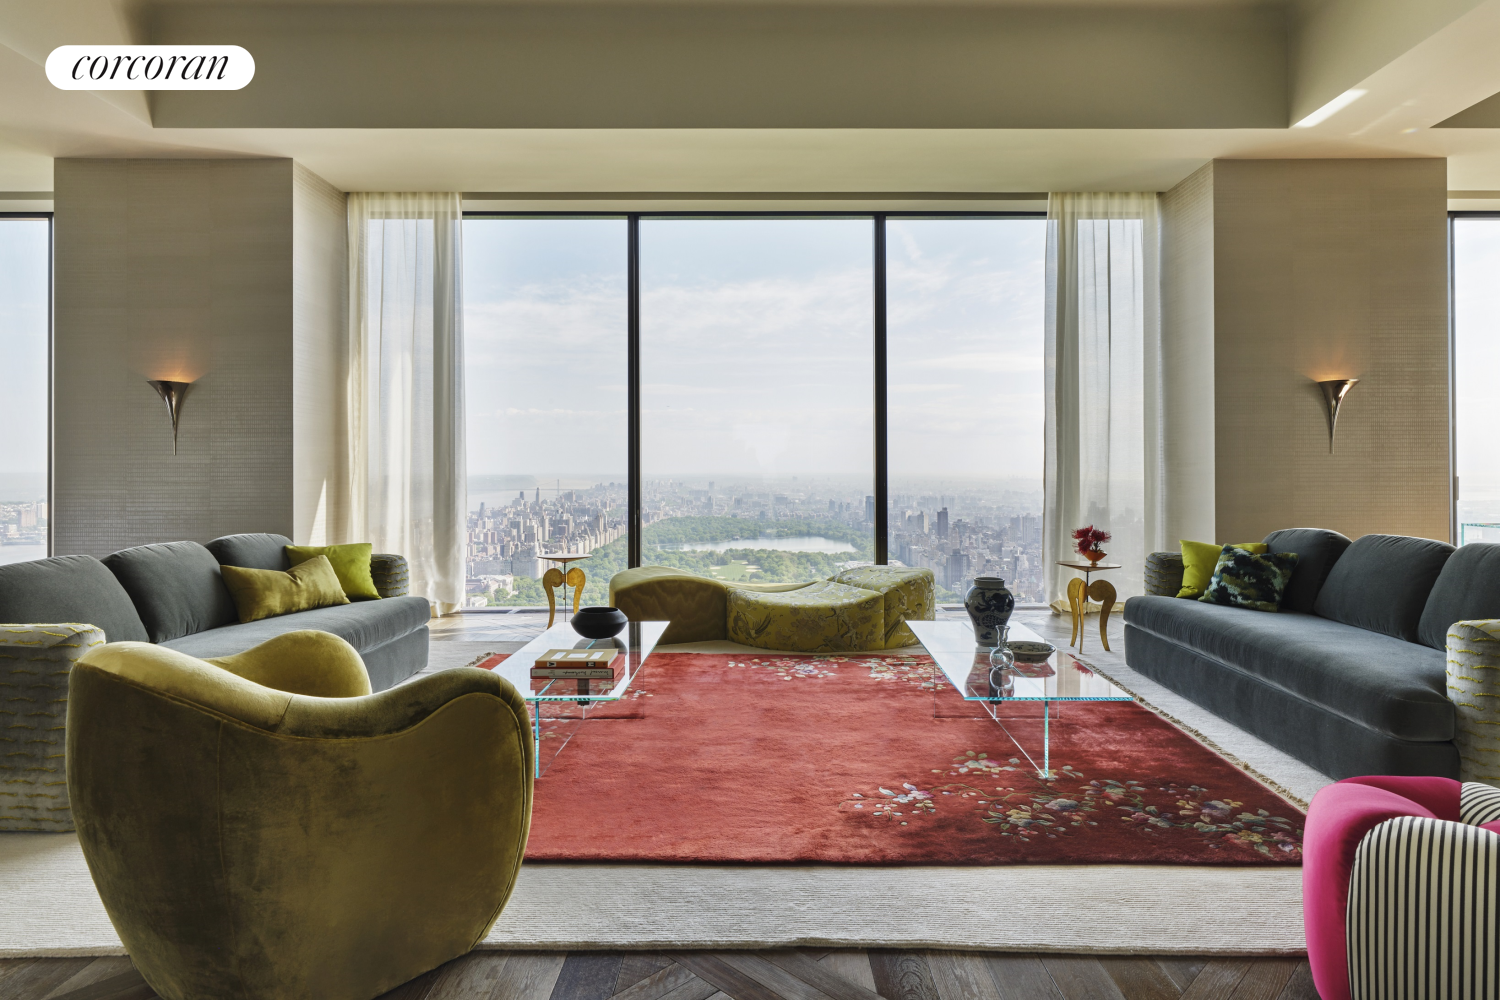 111 West 57th Street 66, Central Park South, Midtown West, NYC - 3 Bedrooms  
3.5 Bathrooms  
6 Rooms - 